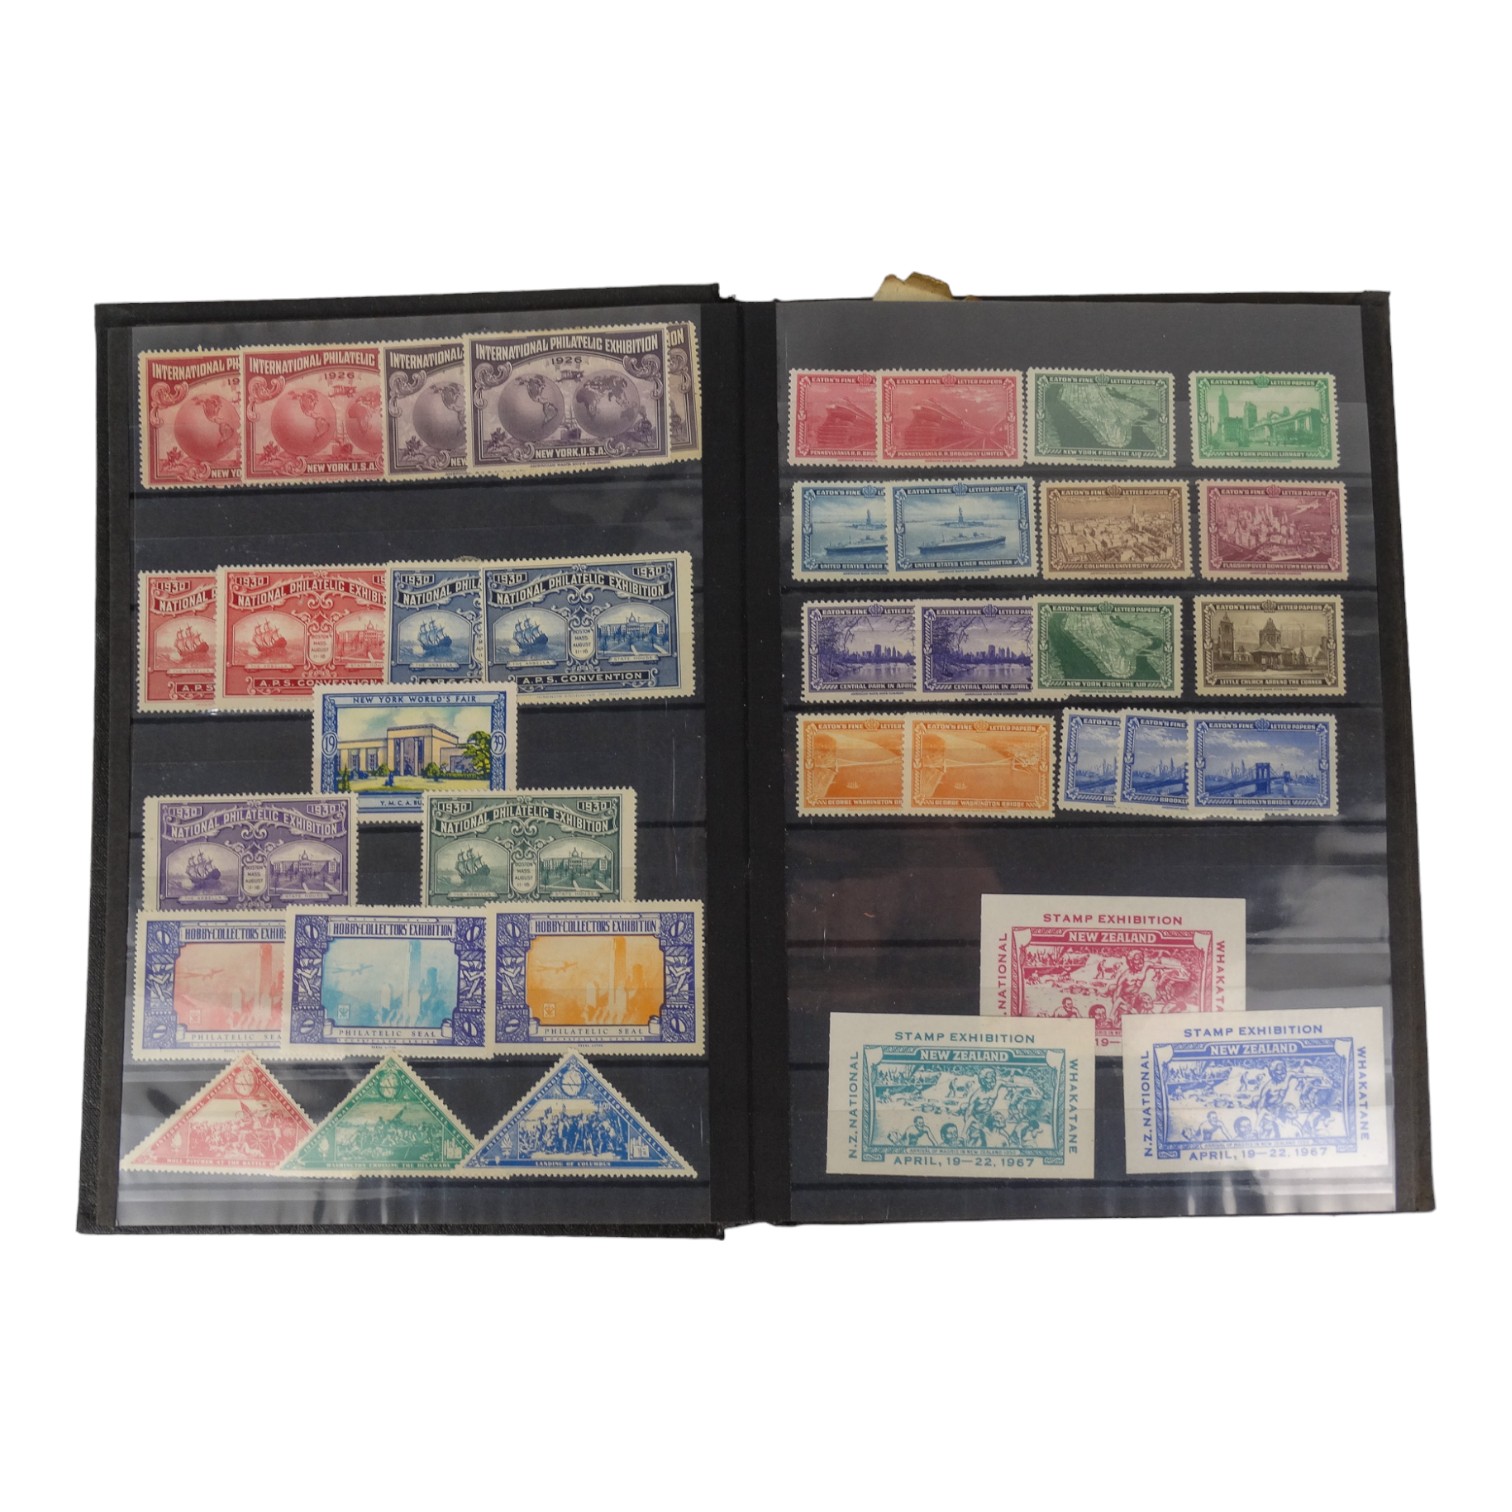 WORLD CINDERELLA STAMPS INCLUDING REVENUES - An interesting Lot contained in a stock book, stock - Image 4 of 6